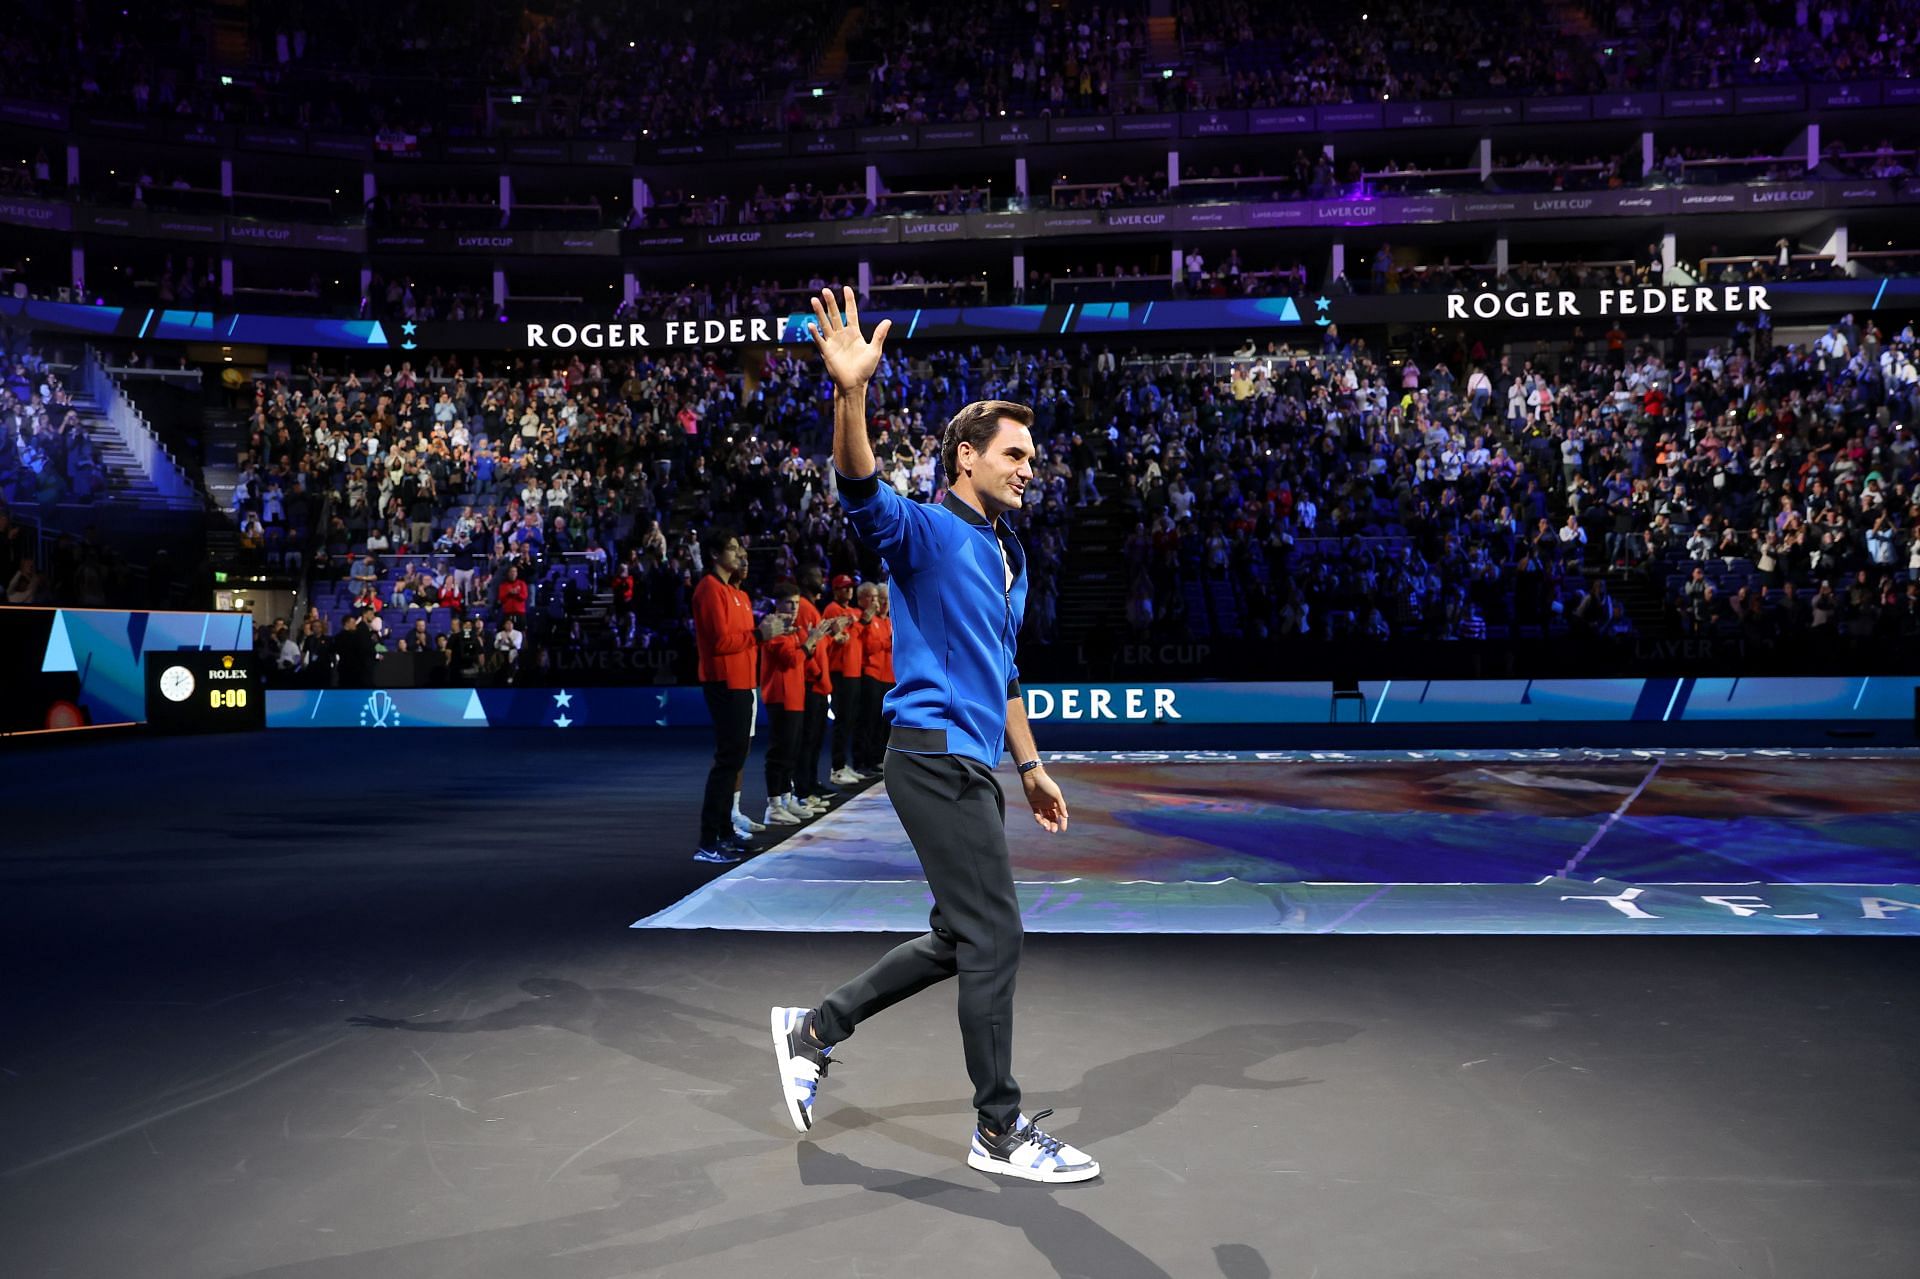 Roger Federer waves to the crowd at the 2022 Laver Cup.